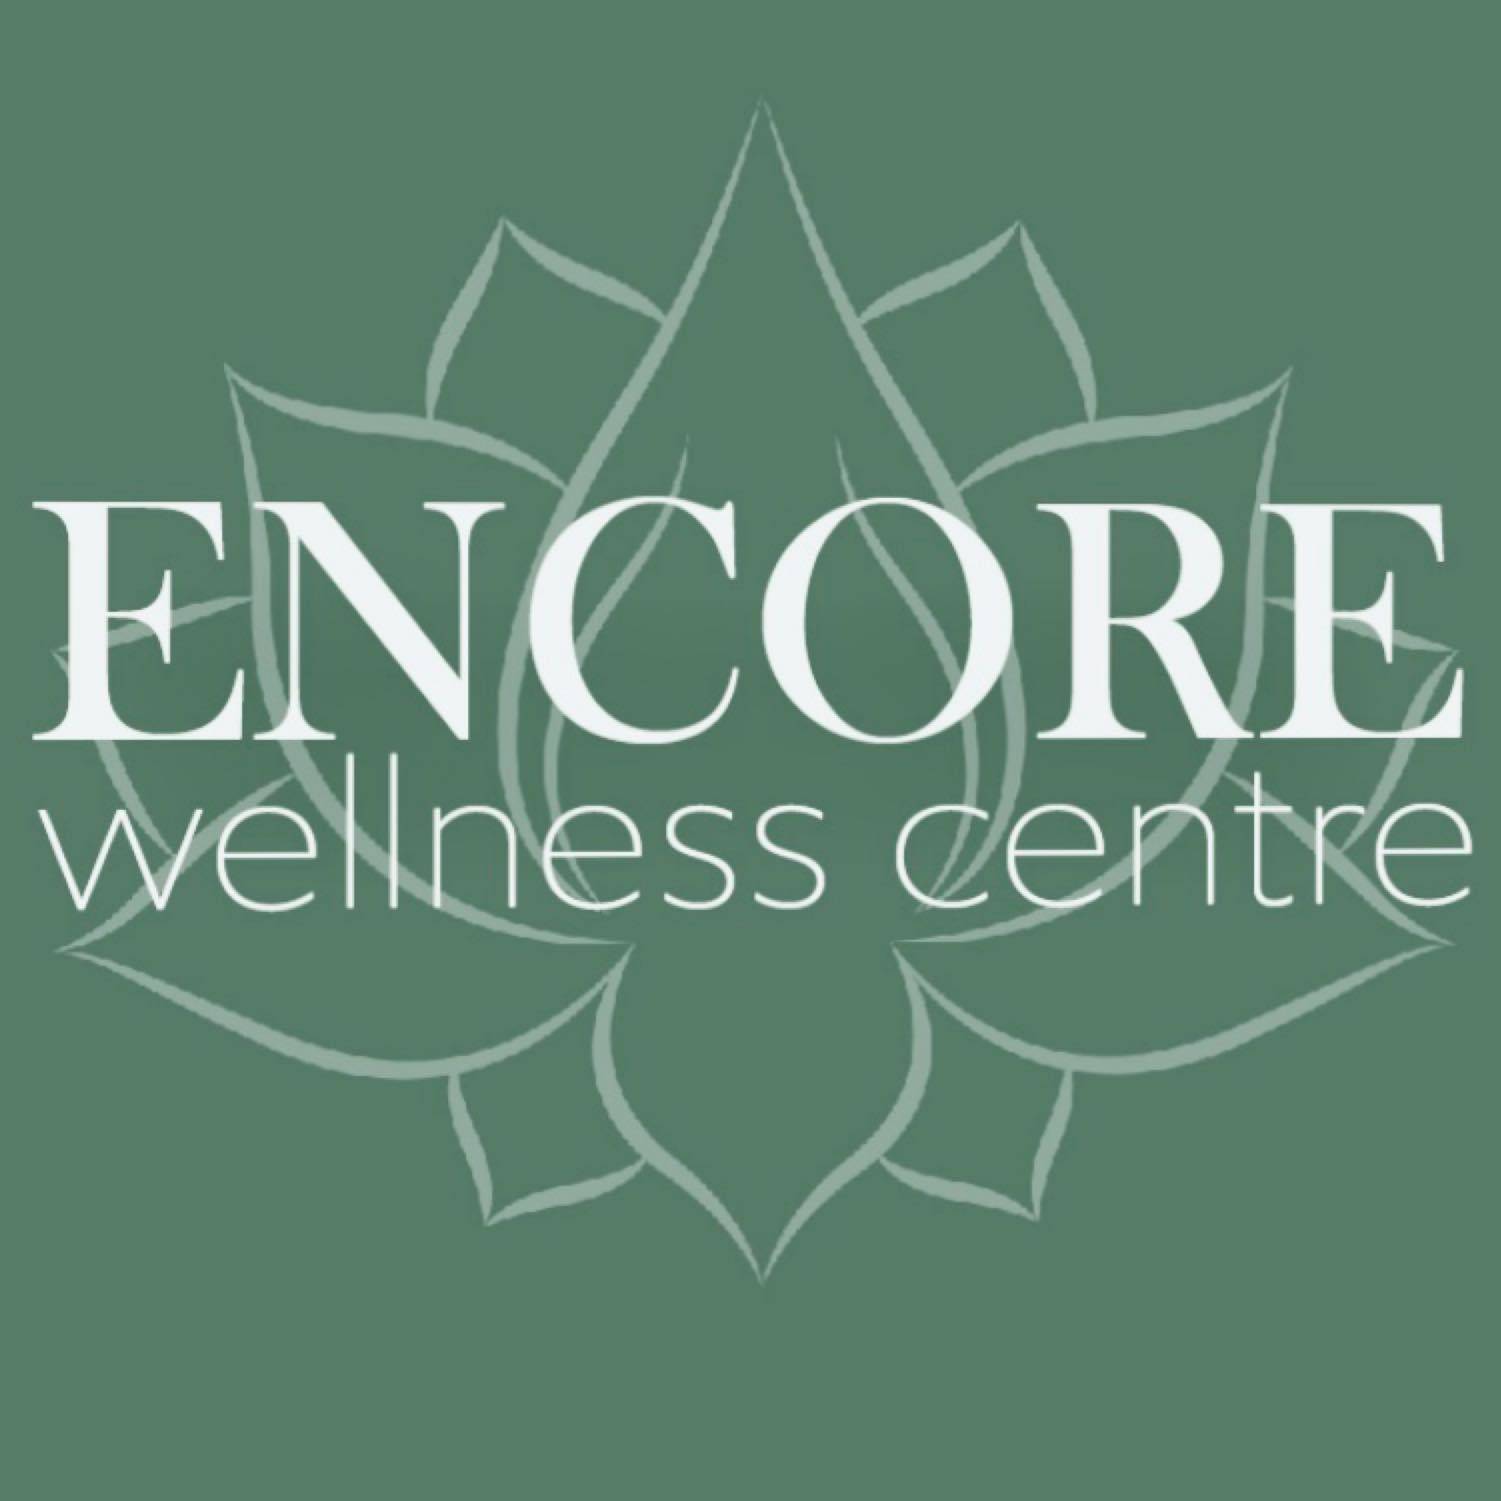 Encore Wellness Centre - Home to the Best Clinical, Beauty and Wellness businesses in Suffolk